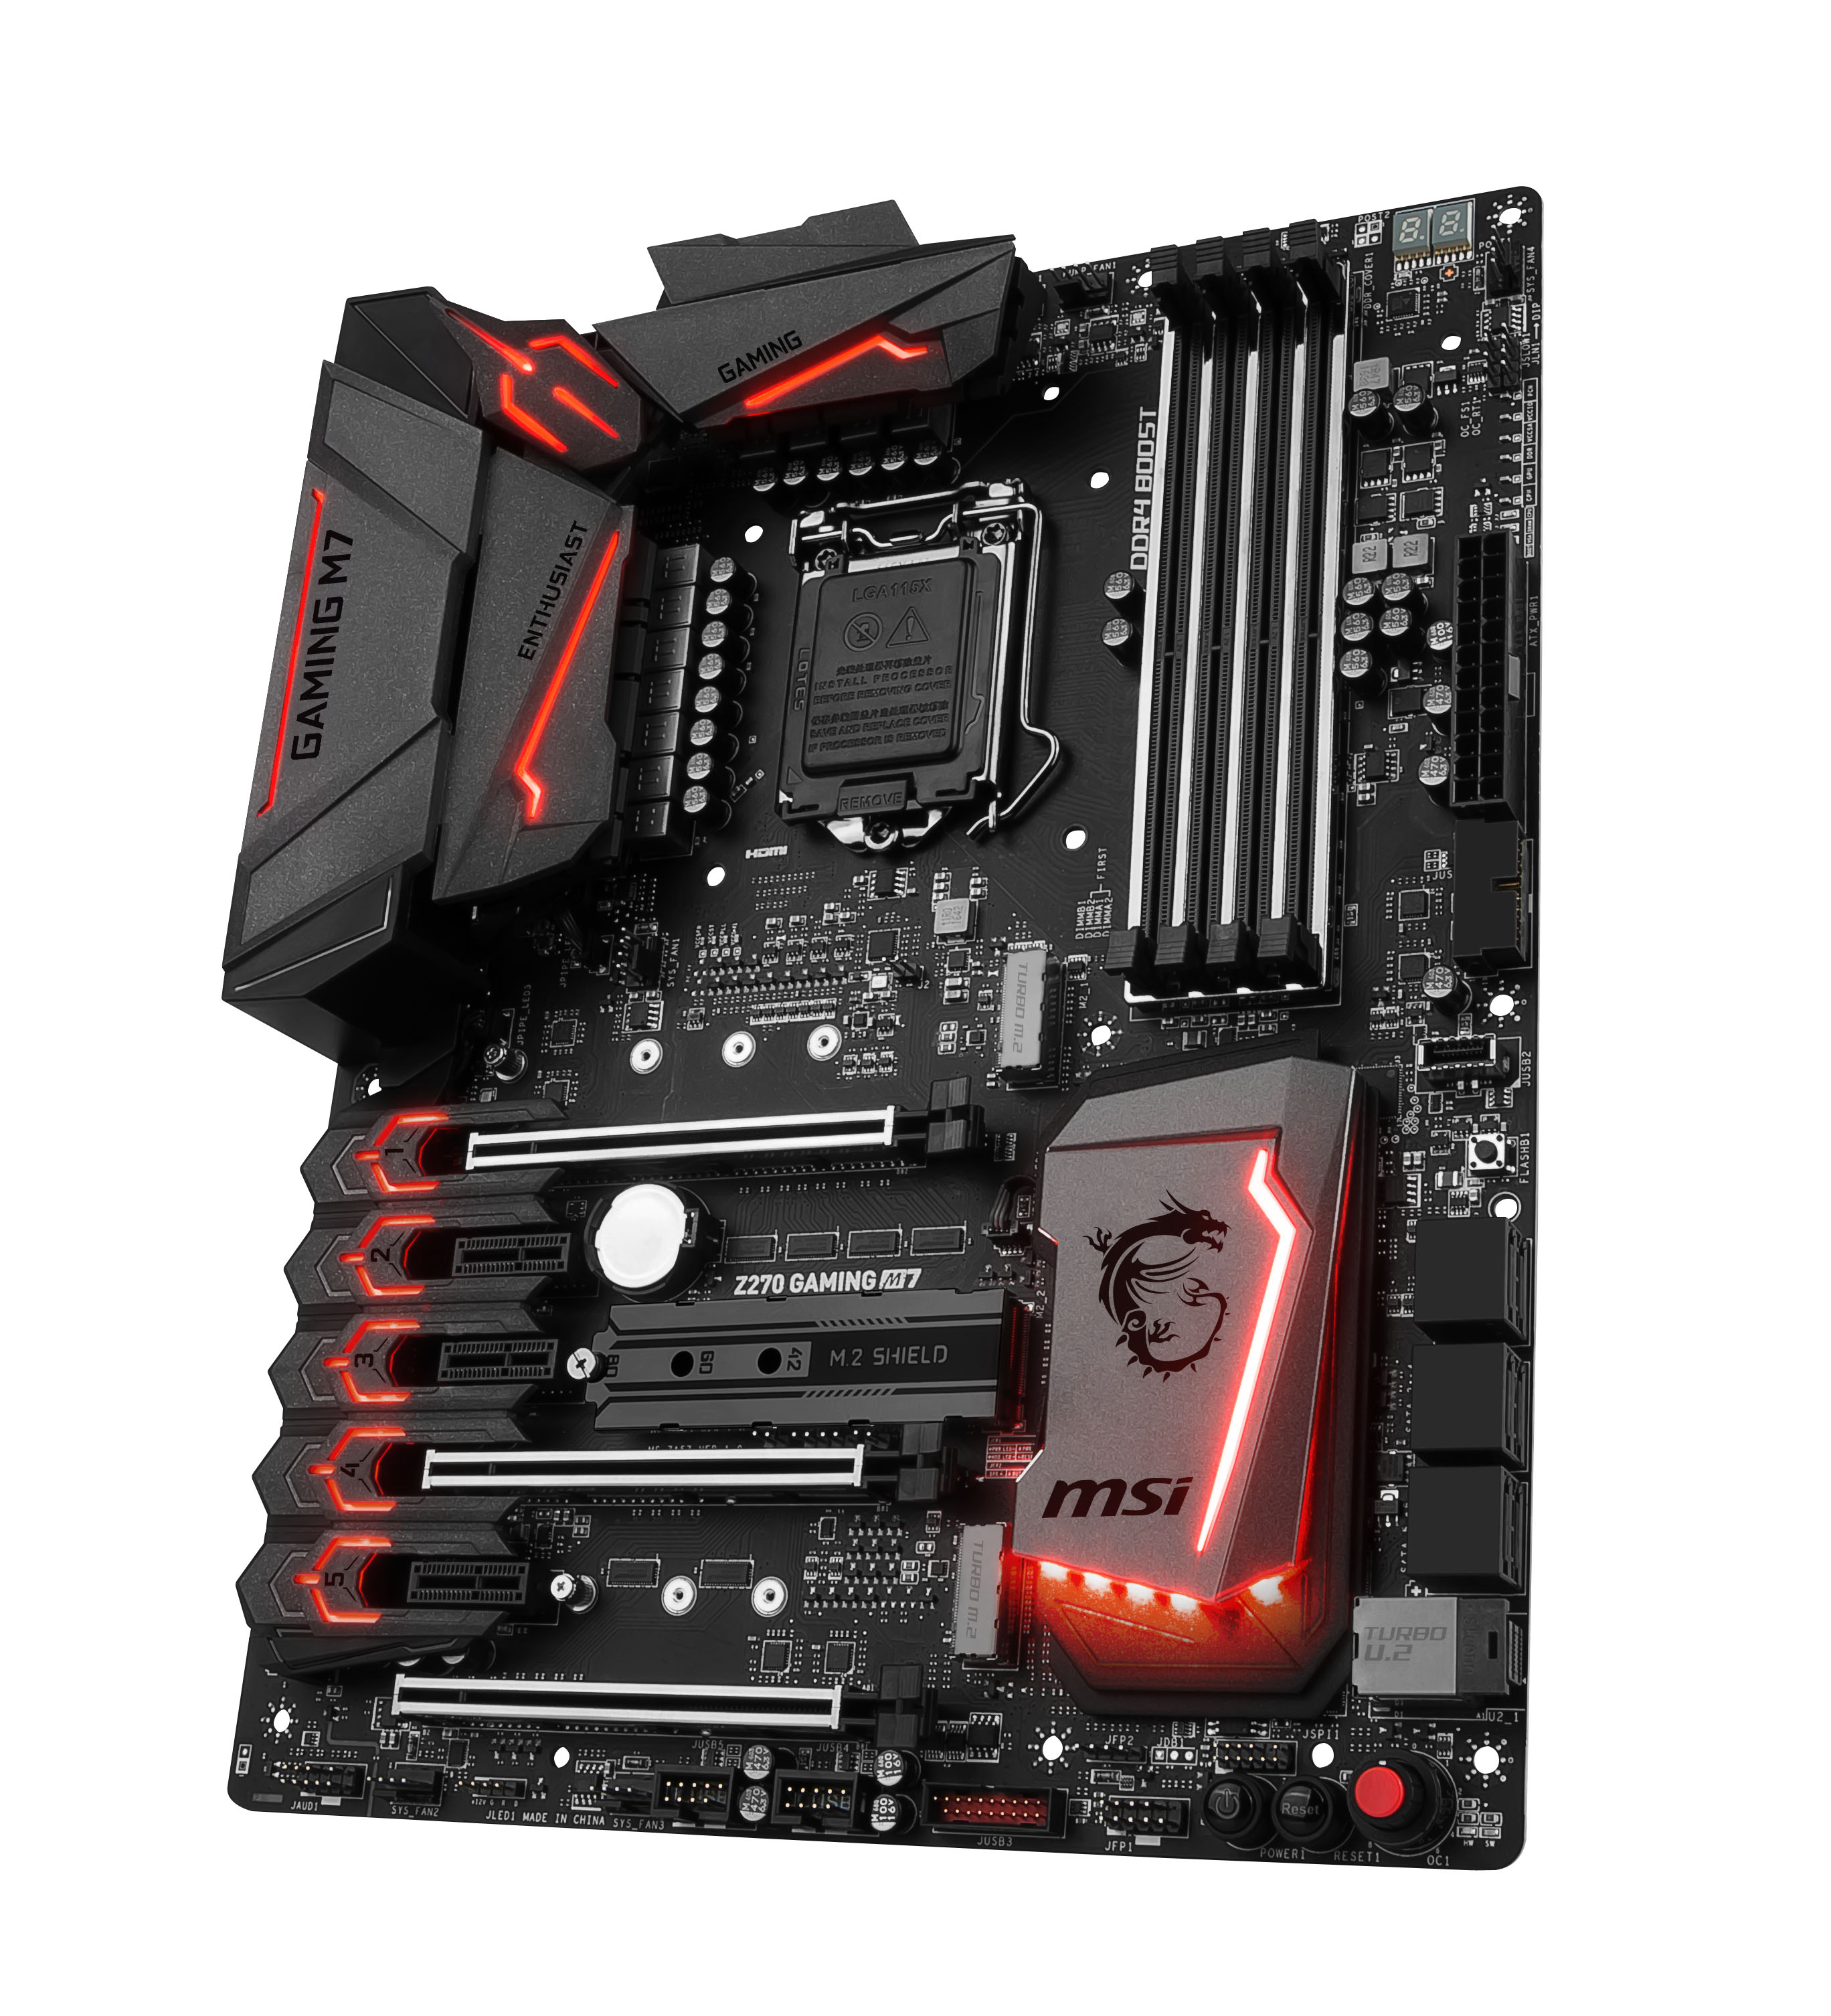 The Z270 GAMING M7 gaming motherboard